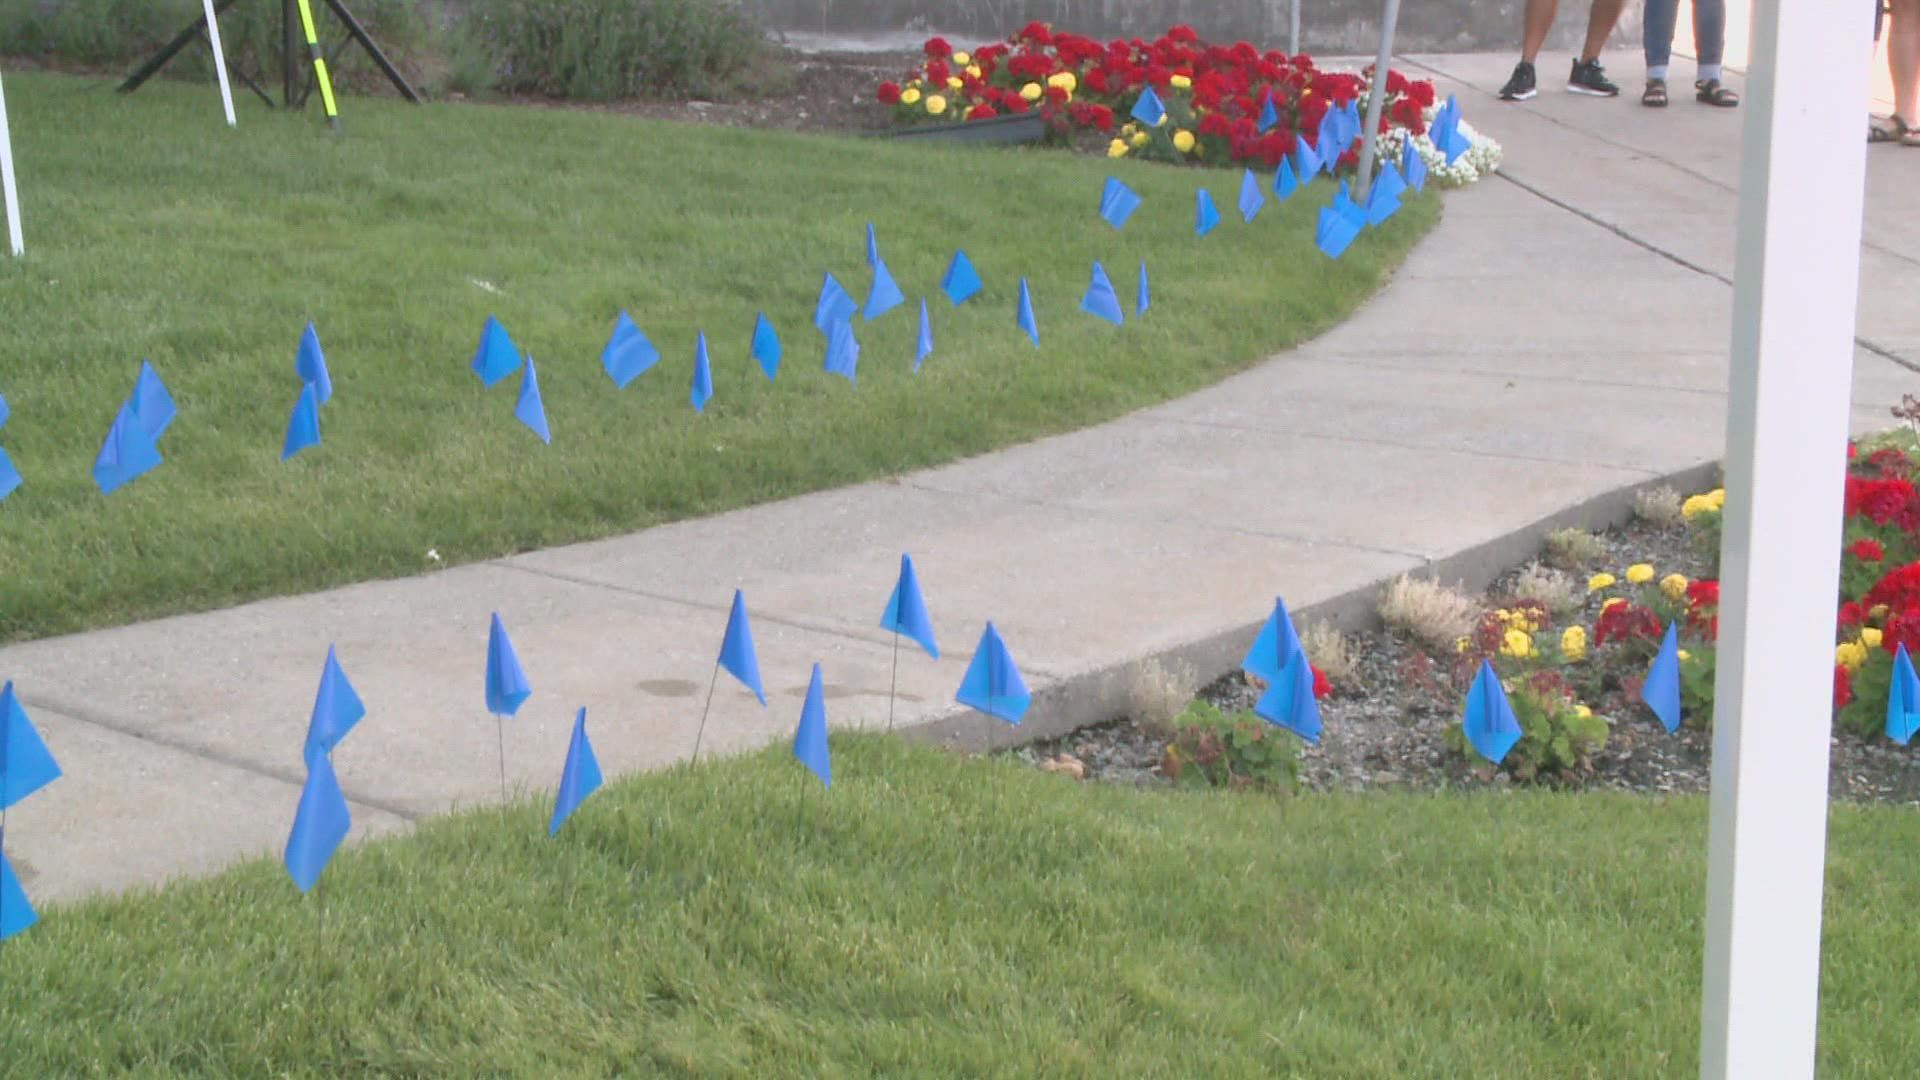 As part of the memorial, MultiCare placed blue flags in the ground to honor the roughly 14-000 local patients who lost their lives to COVID.